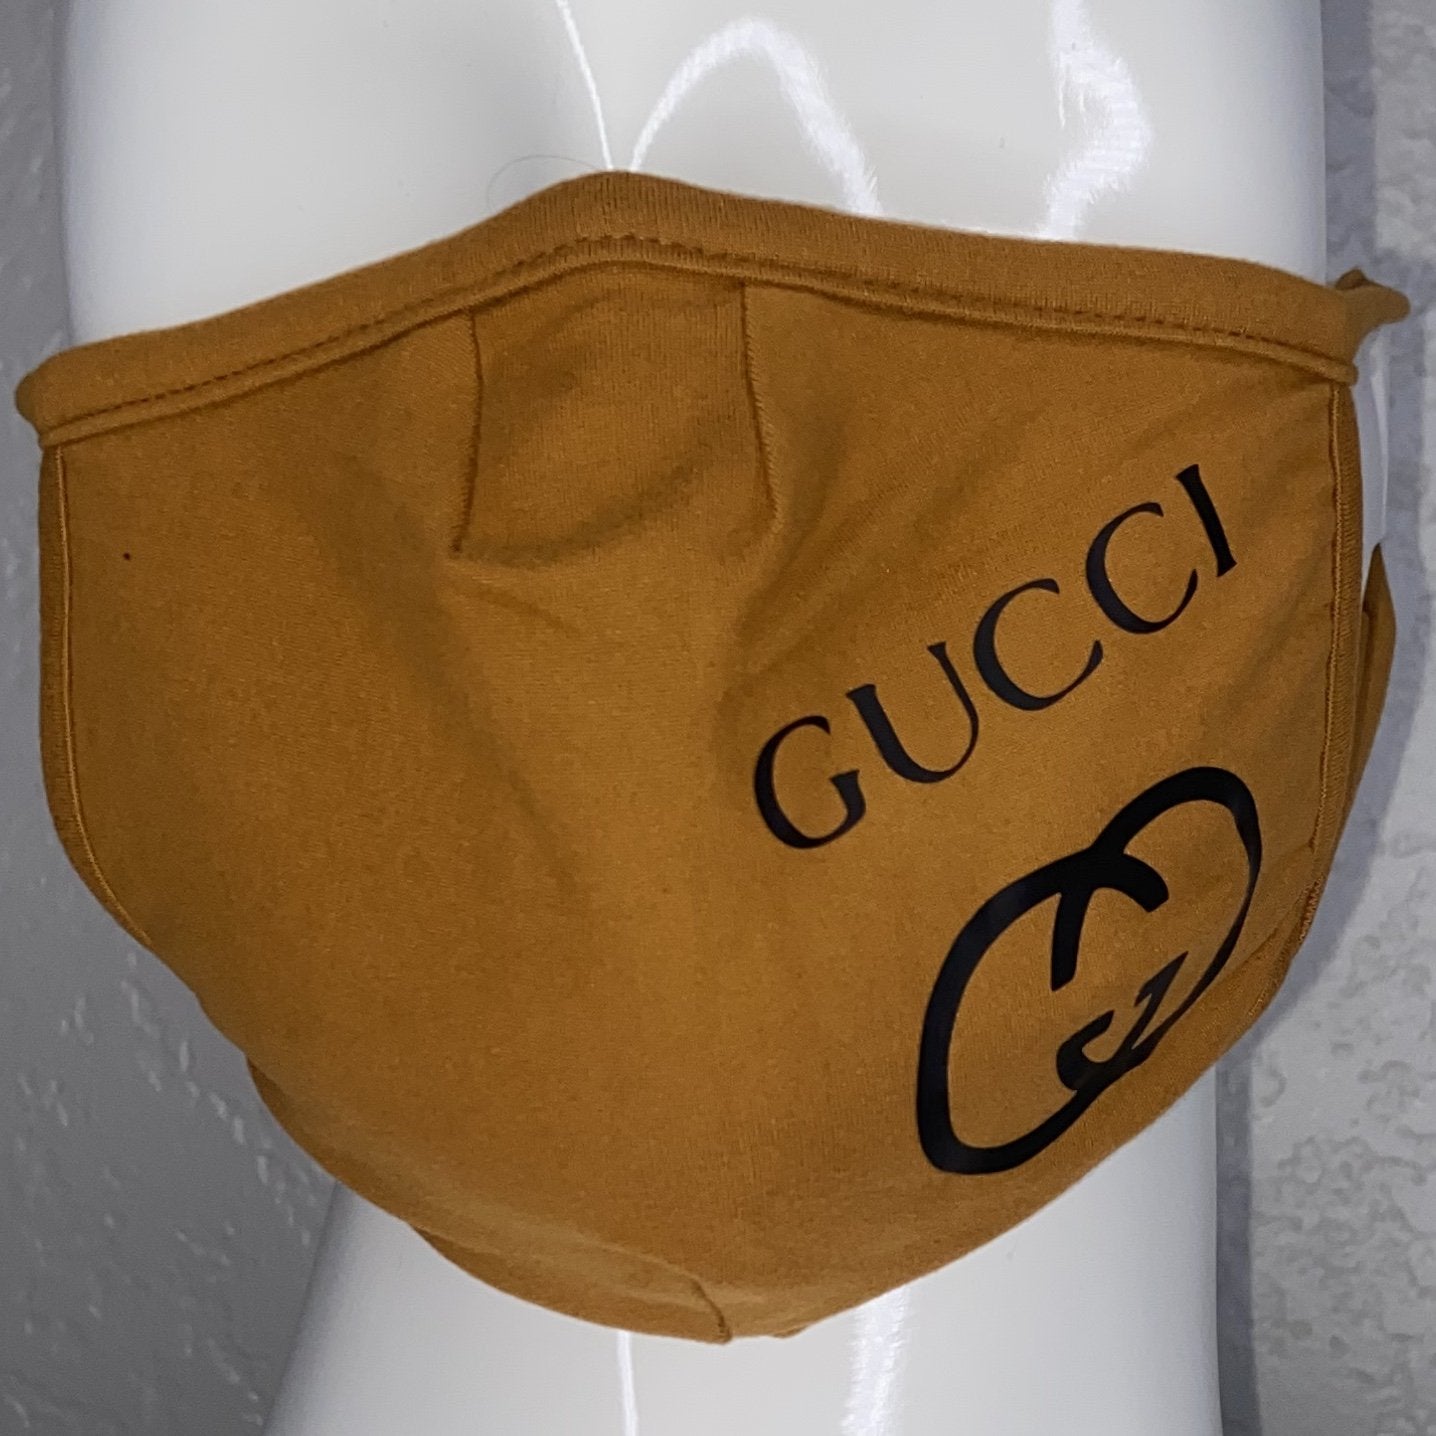 Fashion Mask With Filter Pocket (Replica Dark Tan Gucci) In Stock-Boughie Curves-Boughie